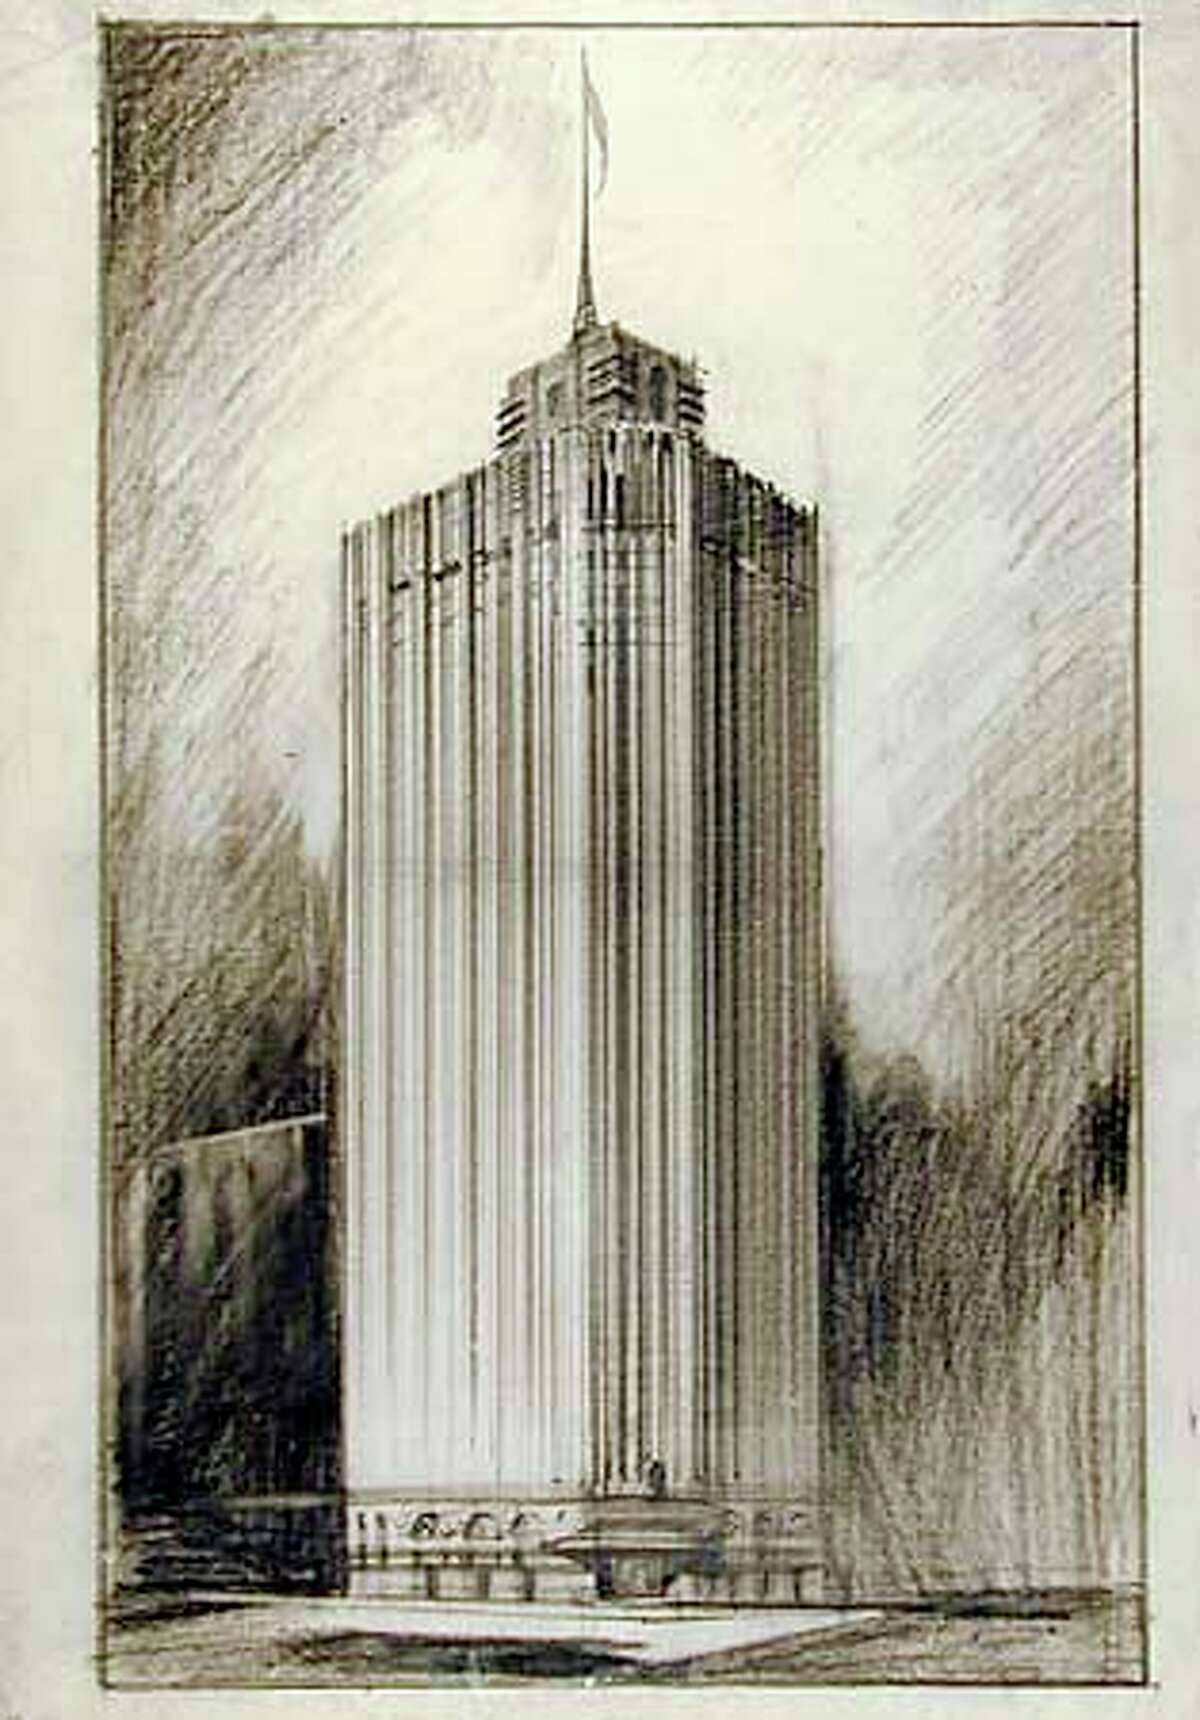 Timothy Pflueger's 1920's image of a tower that was never built emphasized height, with its strong upright lines of charcoal